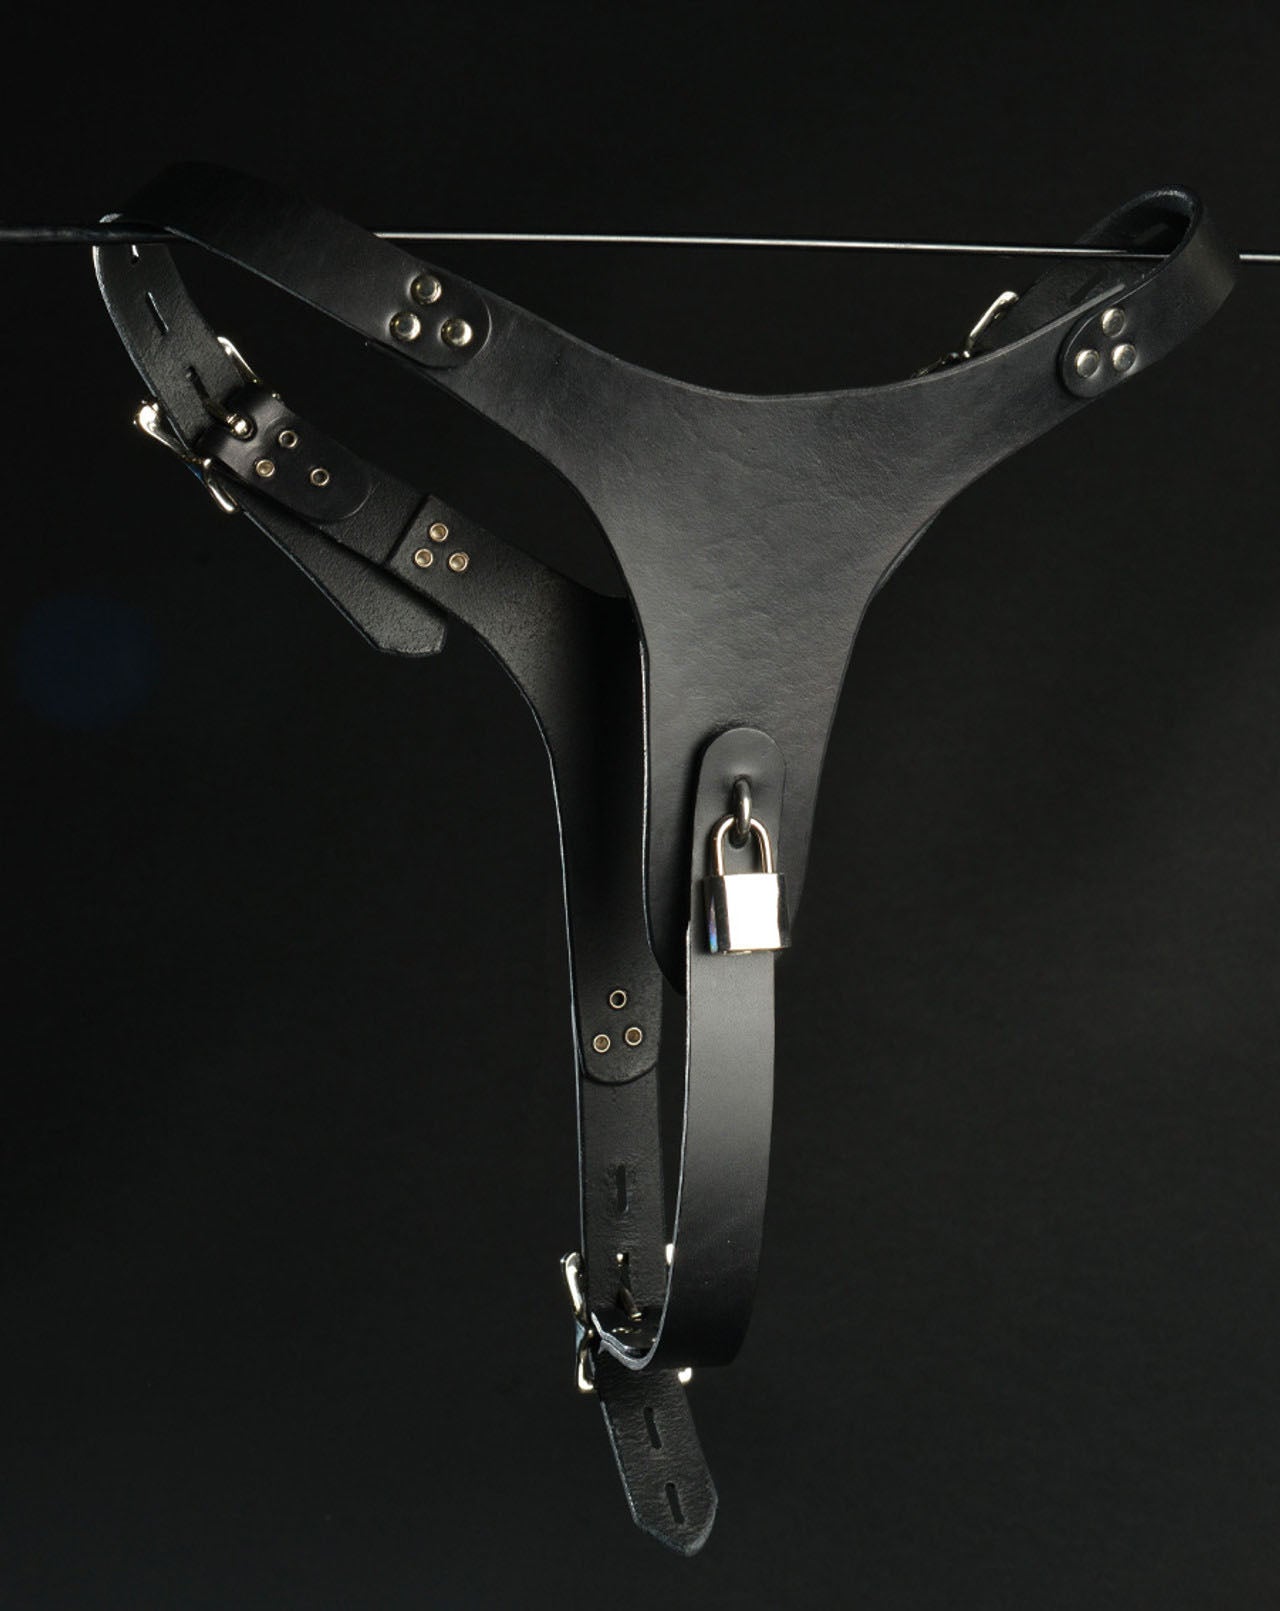 The Adjustable Leather Vaginal Chastity Belt hanging on a metal rod, front view.